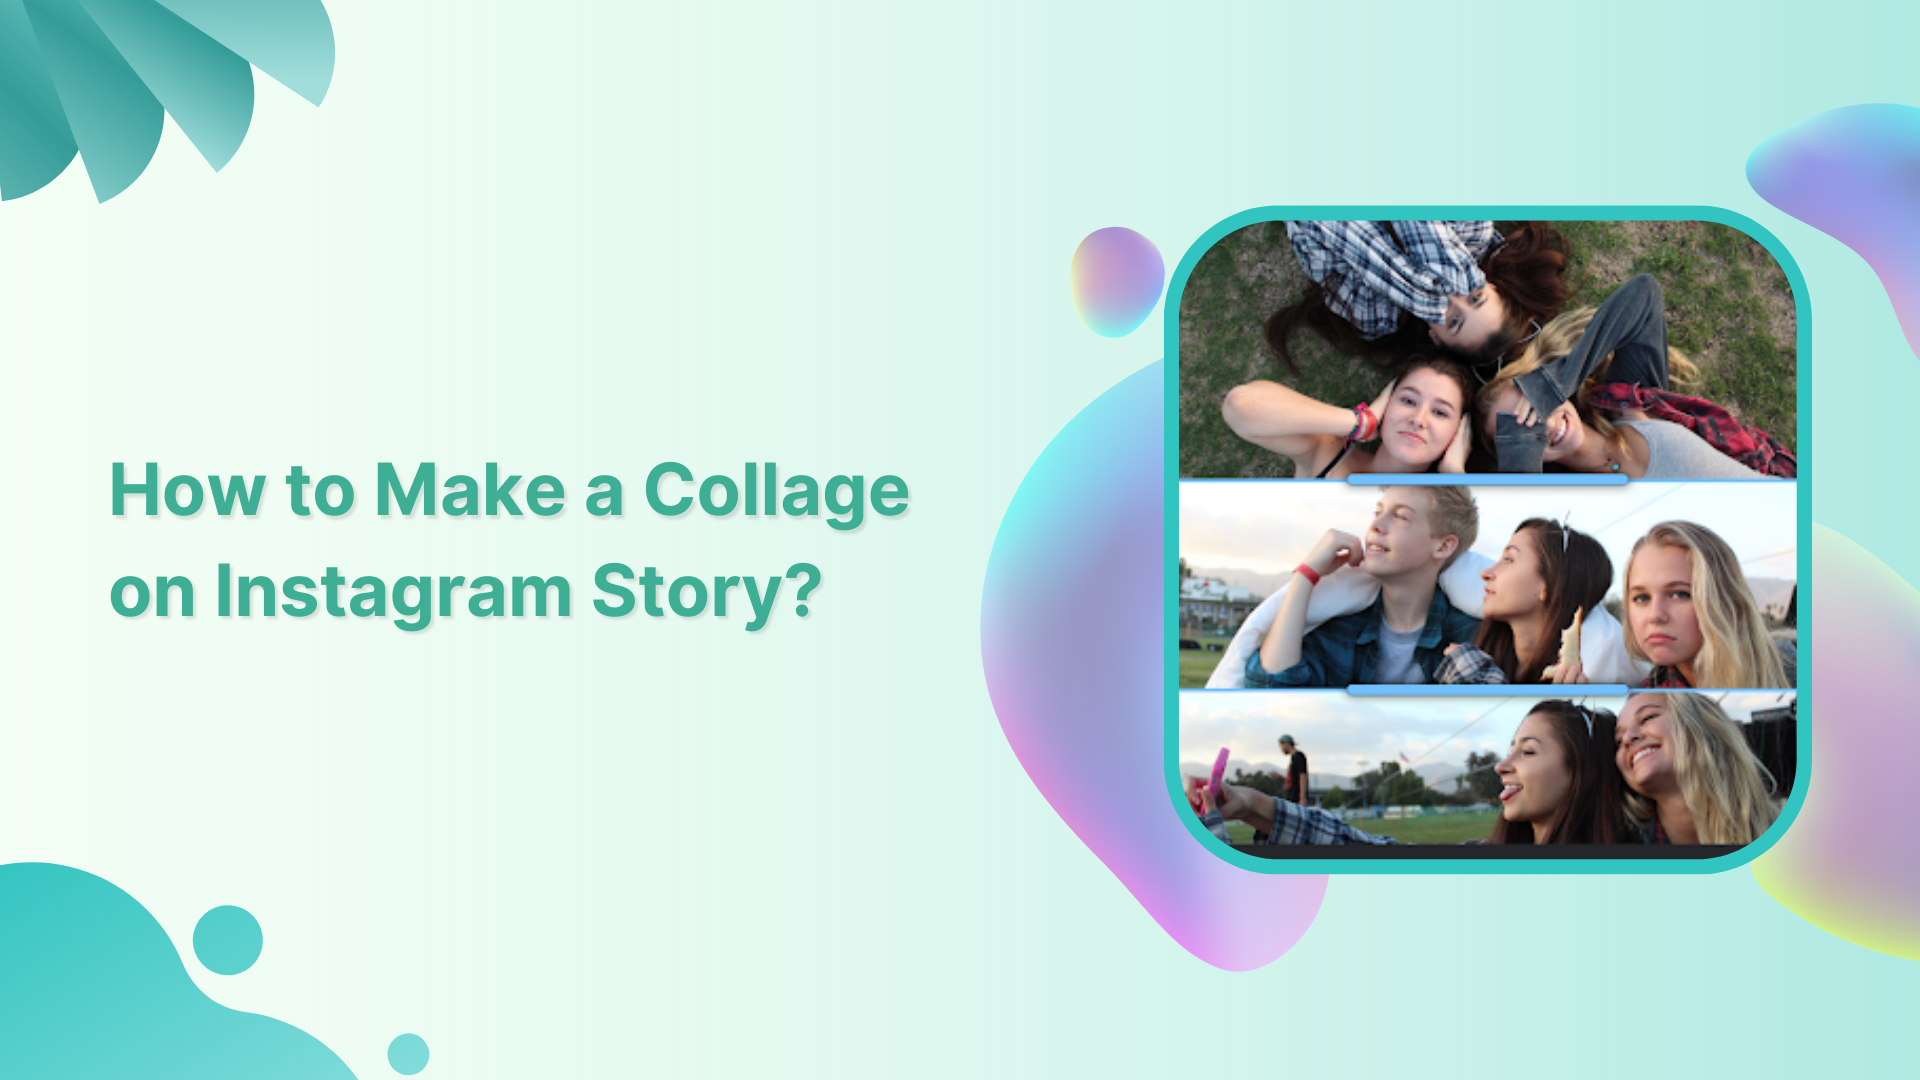 how to make a college on Instagram story